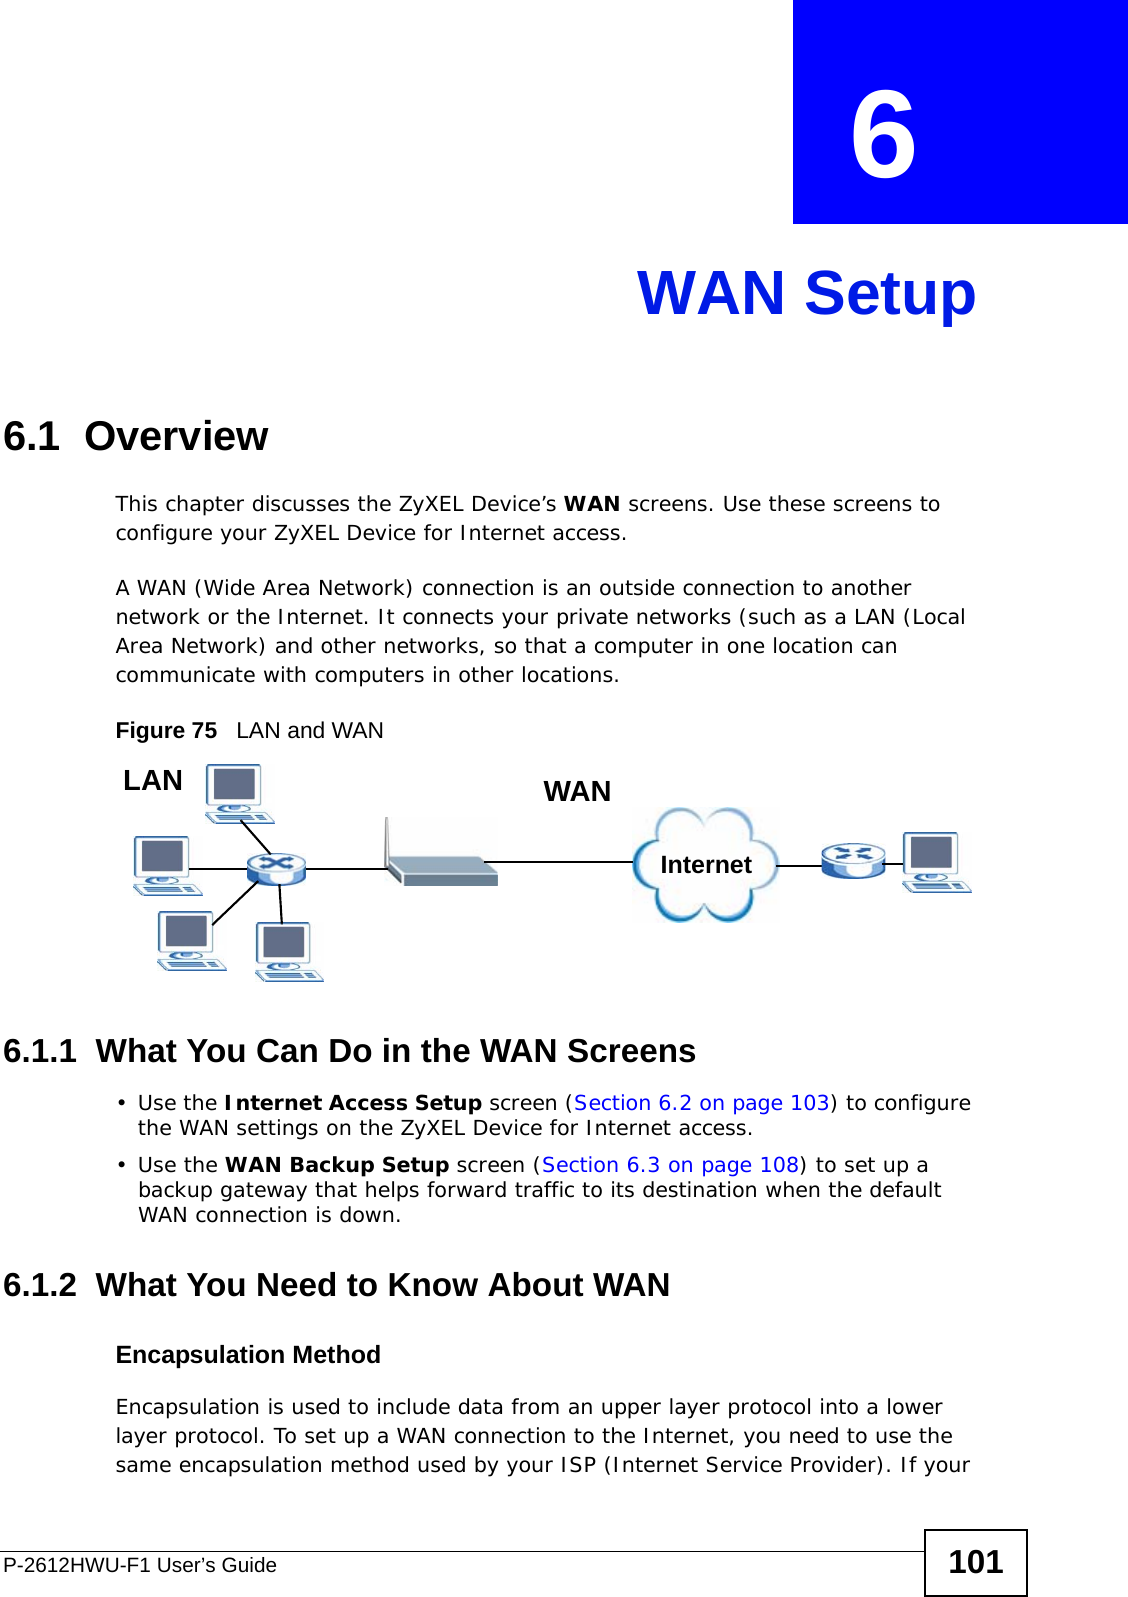 P-2612HWU-F1 User’s Guide 101CHAPTER  6 WAN Setup6.1  OverviewThis chapter discusses the ZyXEL Device’s WAN screens. Use these screens to configure your ZyXEL Device for Internet access.A WAN (Wide Area Network) connection is an outside connection to another network or the Internet. It connects your private networks (such as a LAN (Local Area Network) and other networks, so that a computer in one location can communicate with computers in other locations.Figure 75   LAN and WAN6.1.1  What You Can Do in the WAN Screens•Use the Internet Access Setup screen (Section 6.2 on page 103) to configure the WAN settings on the ZyXEL Device for Internet access.•Use the WAN Backup Setup screen (Section 6.3 on page 108) to set up a backup gateway that helps forward traffic to its destination when the default WAN connection is down. 6.1.2  What You Need to Know About WANEncapsulation MethodEncapsulation is used to include data from an upper layer protocol into a lower layer protocol. To set up a WAN connection to the Internet, you need to use the same encapsulation method used by your ISP (Internet Service Provider). If your InternetWANLAN